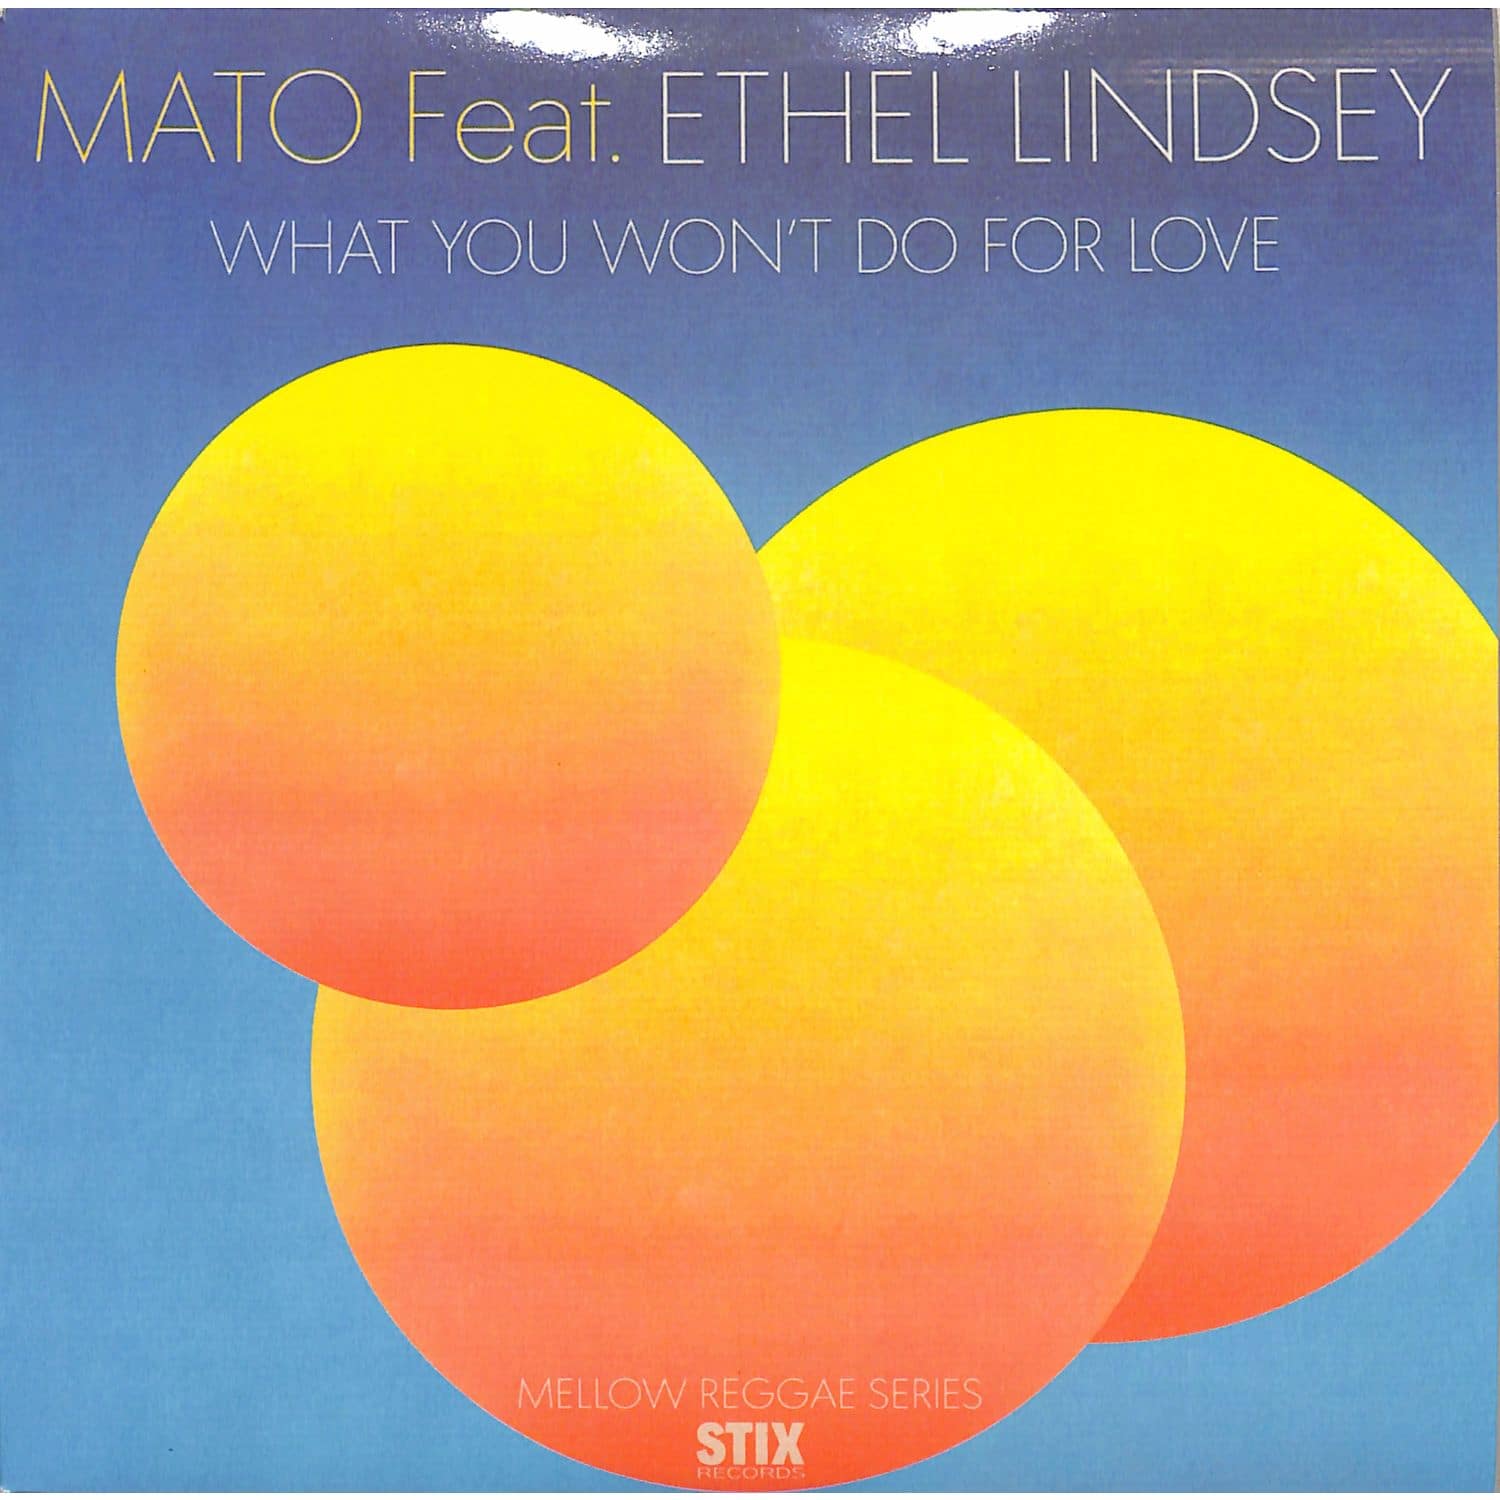 Mato Feat. Ethel Lindsey - WHAT YOU WONT DO FOR LOVE 